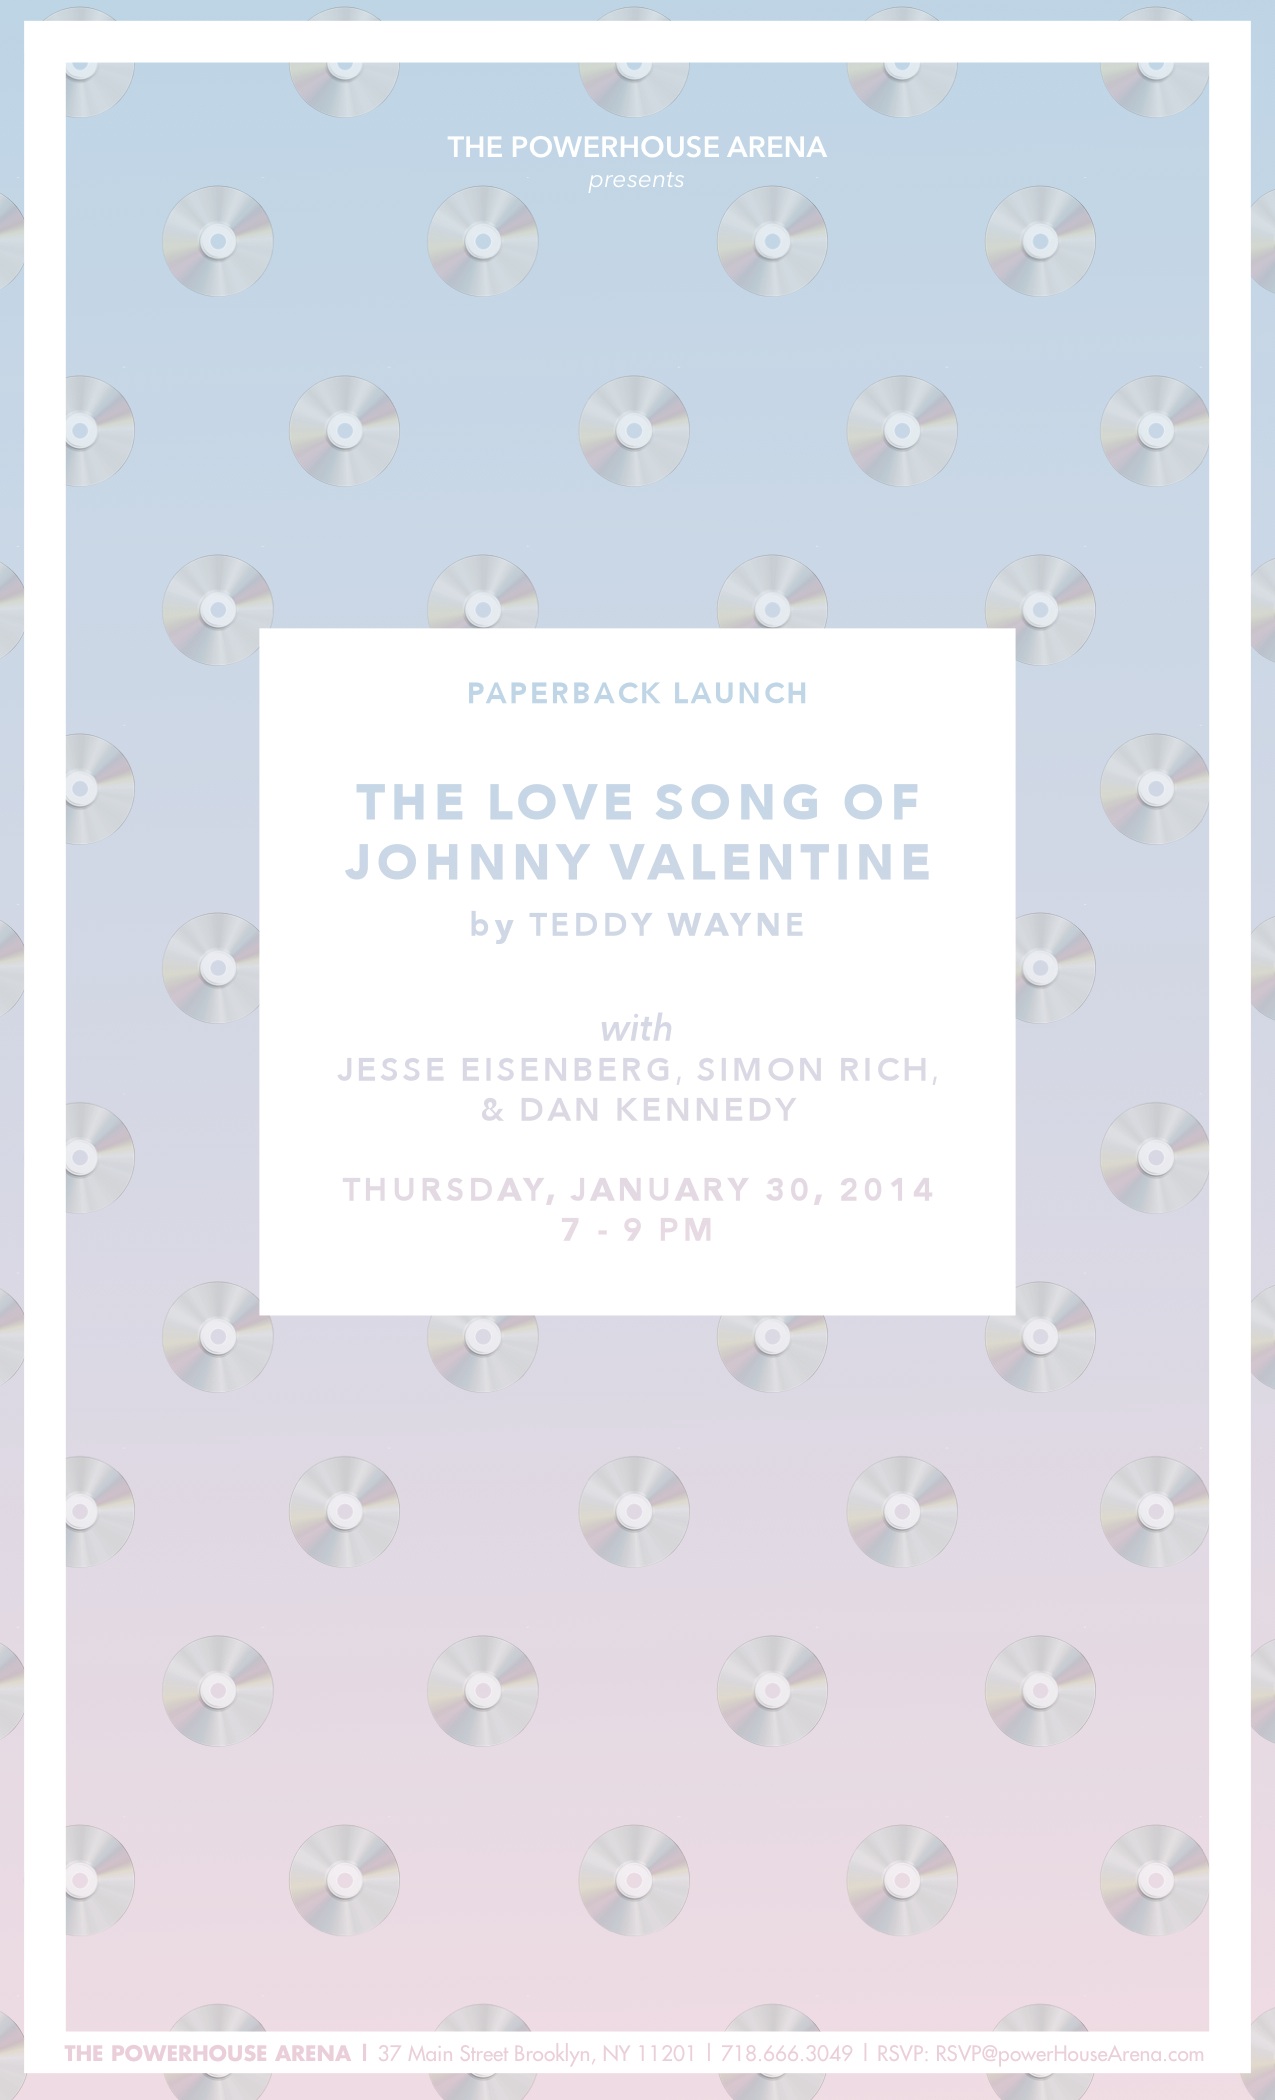 Paperback Launch: The Love Song of Jonny Valentine by Teddy Wayne, with Jesse Eisenberg, Simon Rich, and Dan Kennedy